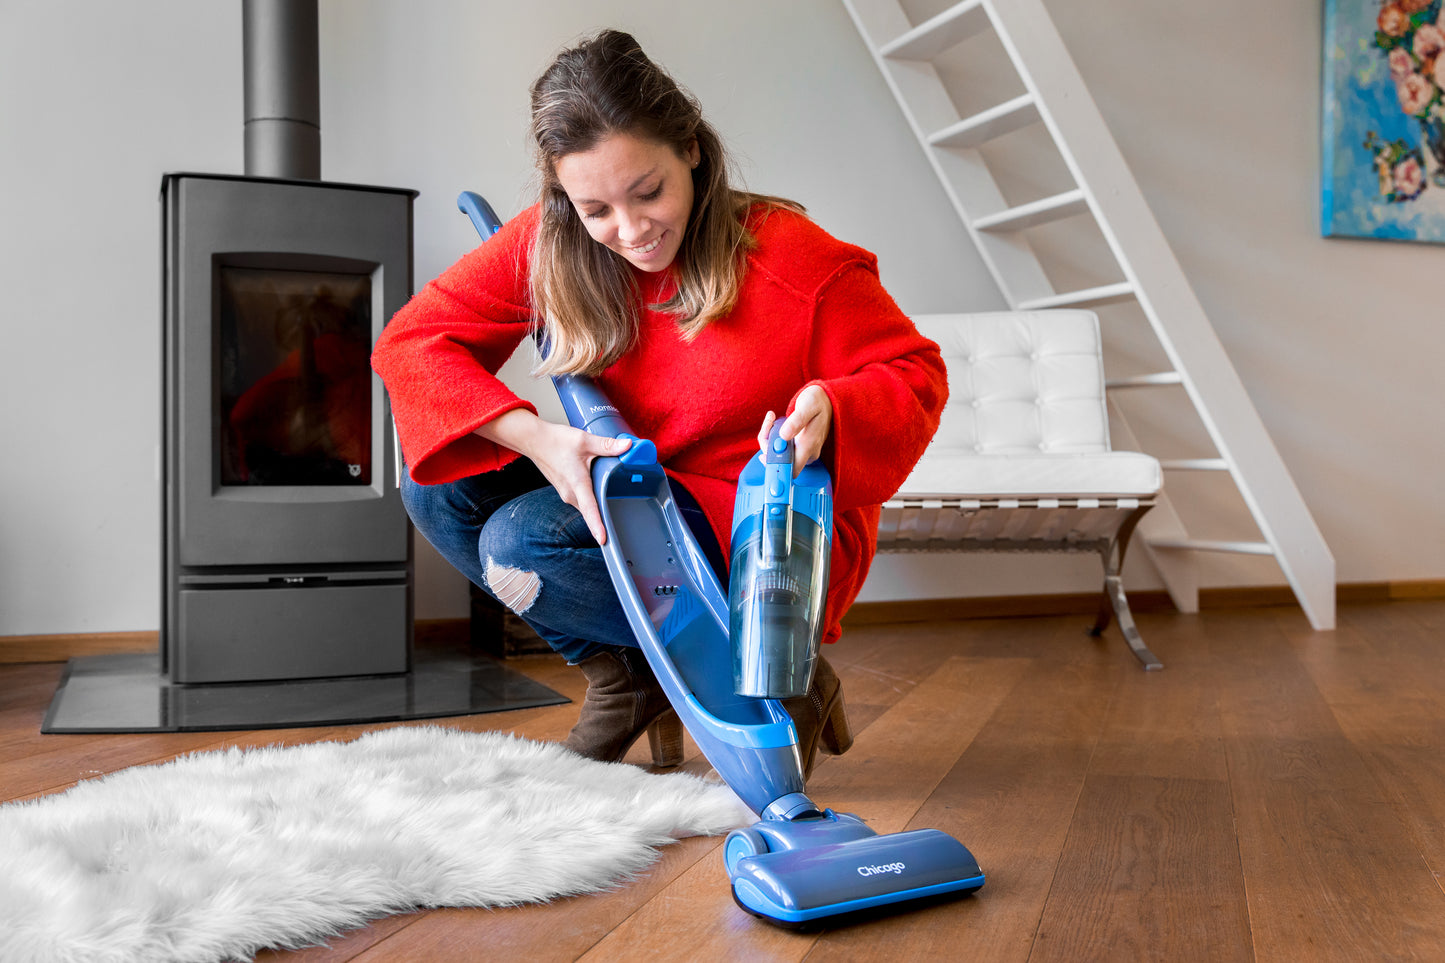 Montiss CVC643 Chicago - Cordless, rechargeable 2-in-1 Vacuum Cleaner with wet and dry functions - Blue